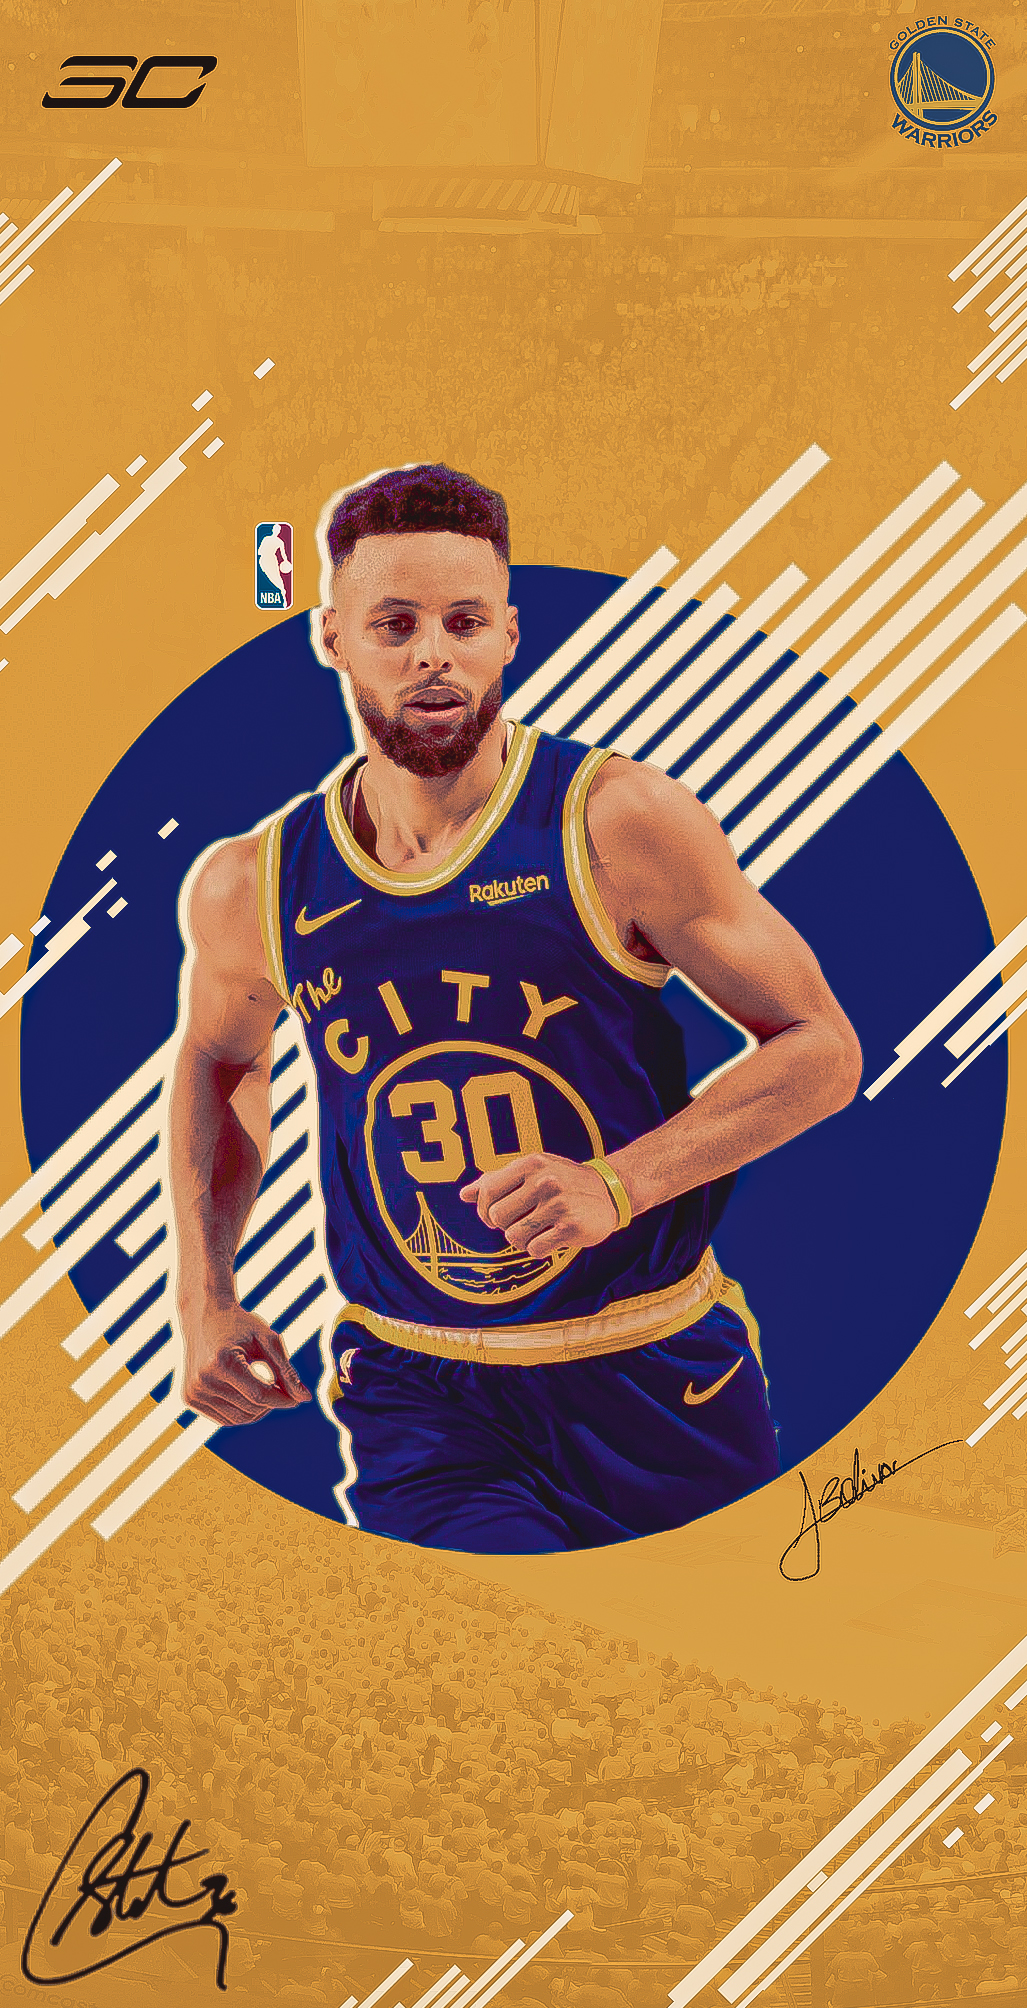 100+] Stephen Curry Cool Wallpapers